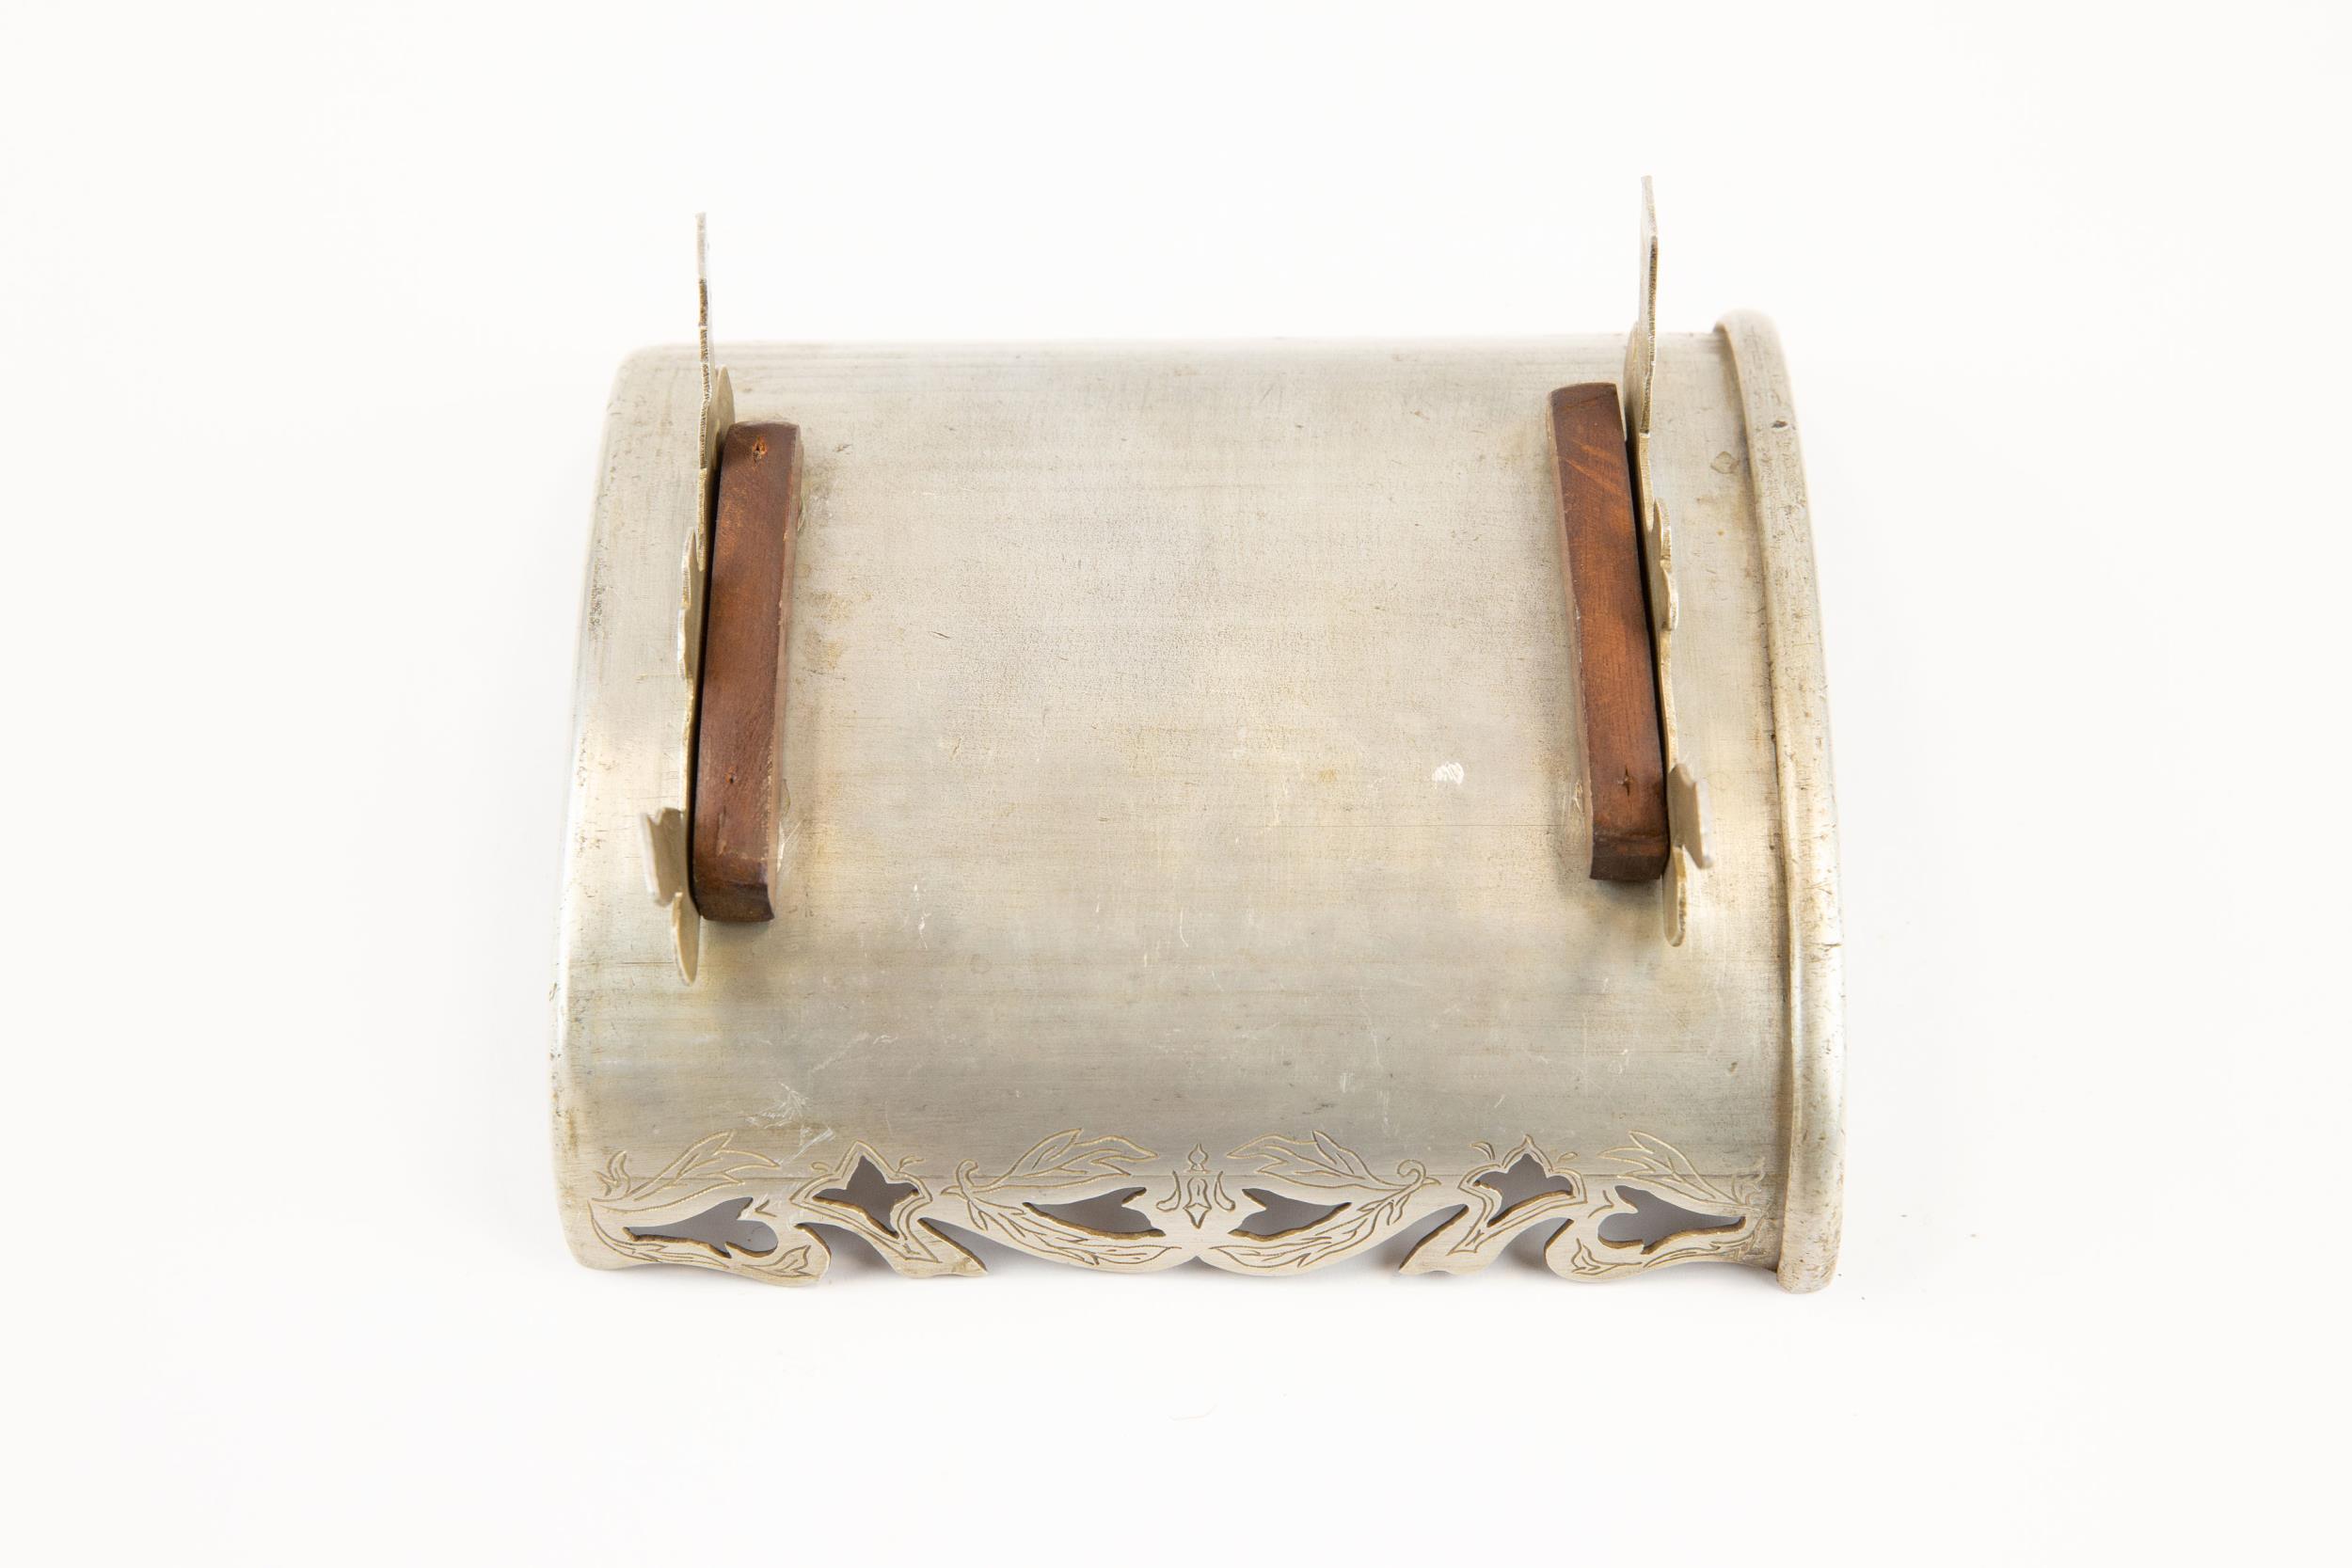 A WWI "Trench Art" souvenir basket or tray, made from a section of an aluminium water bottle, - Image 2 of 2